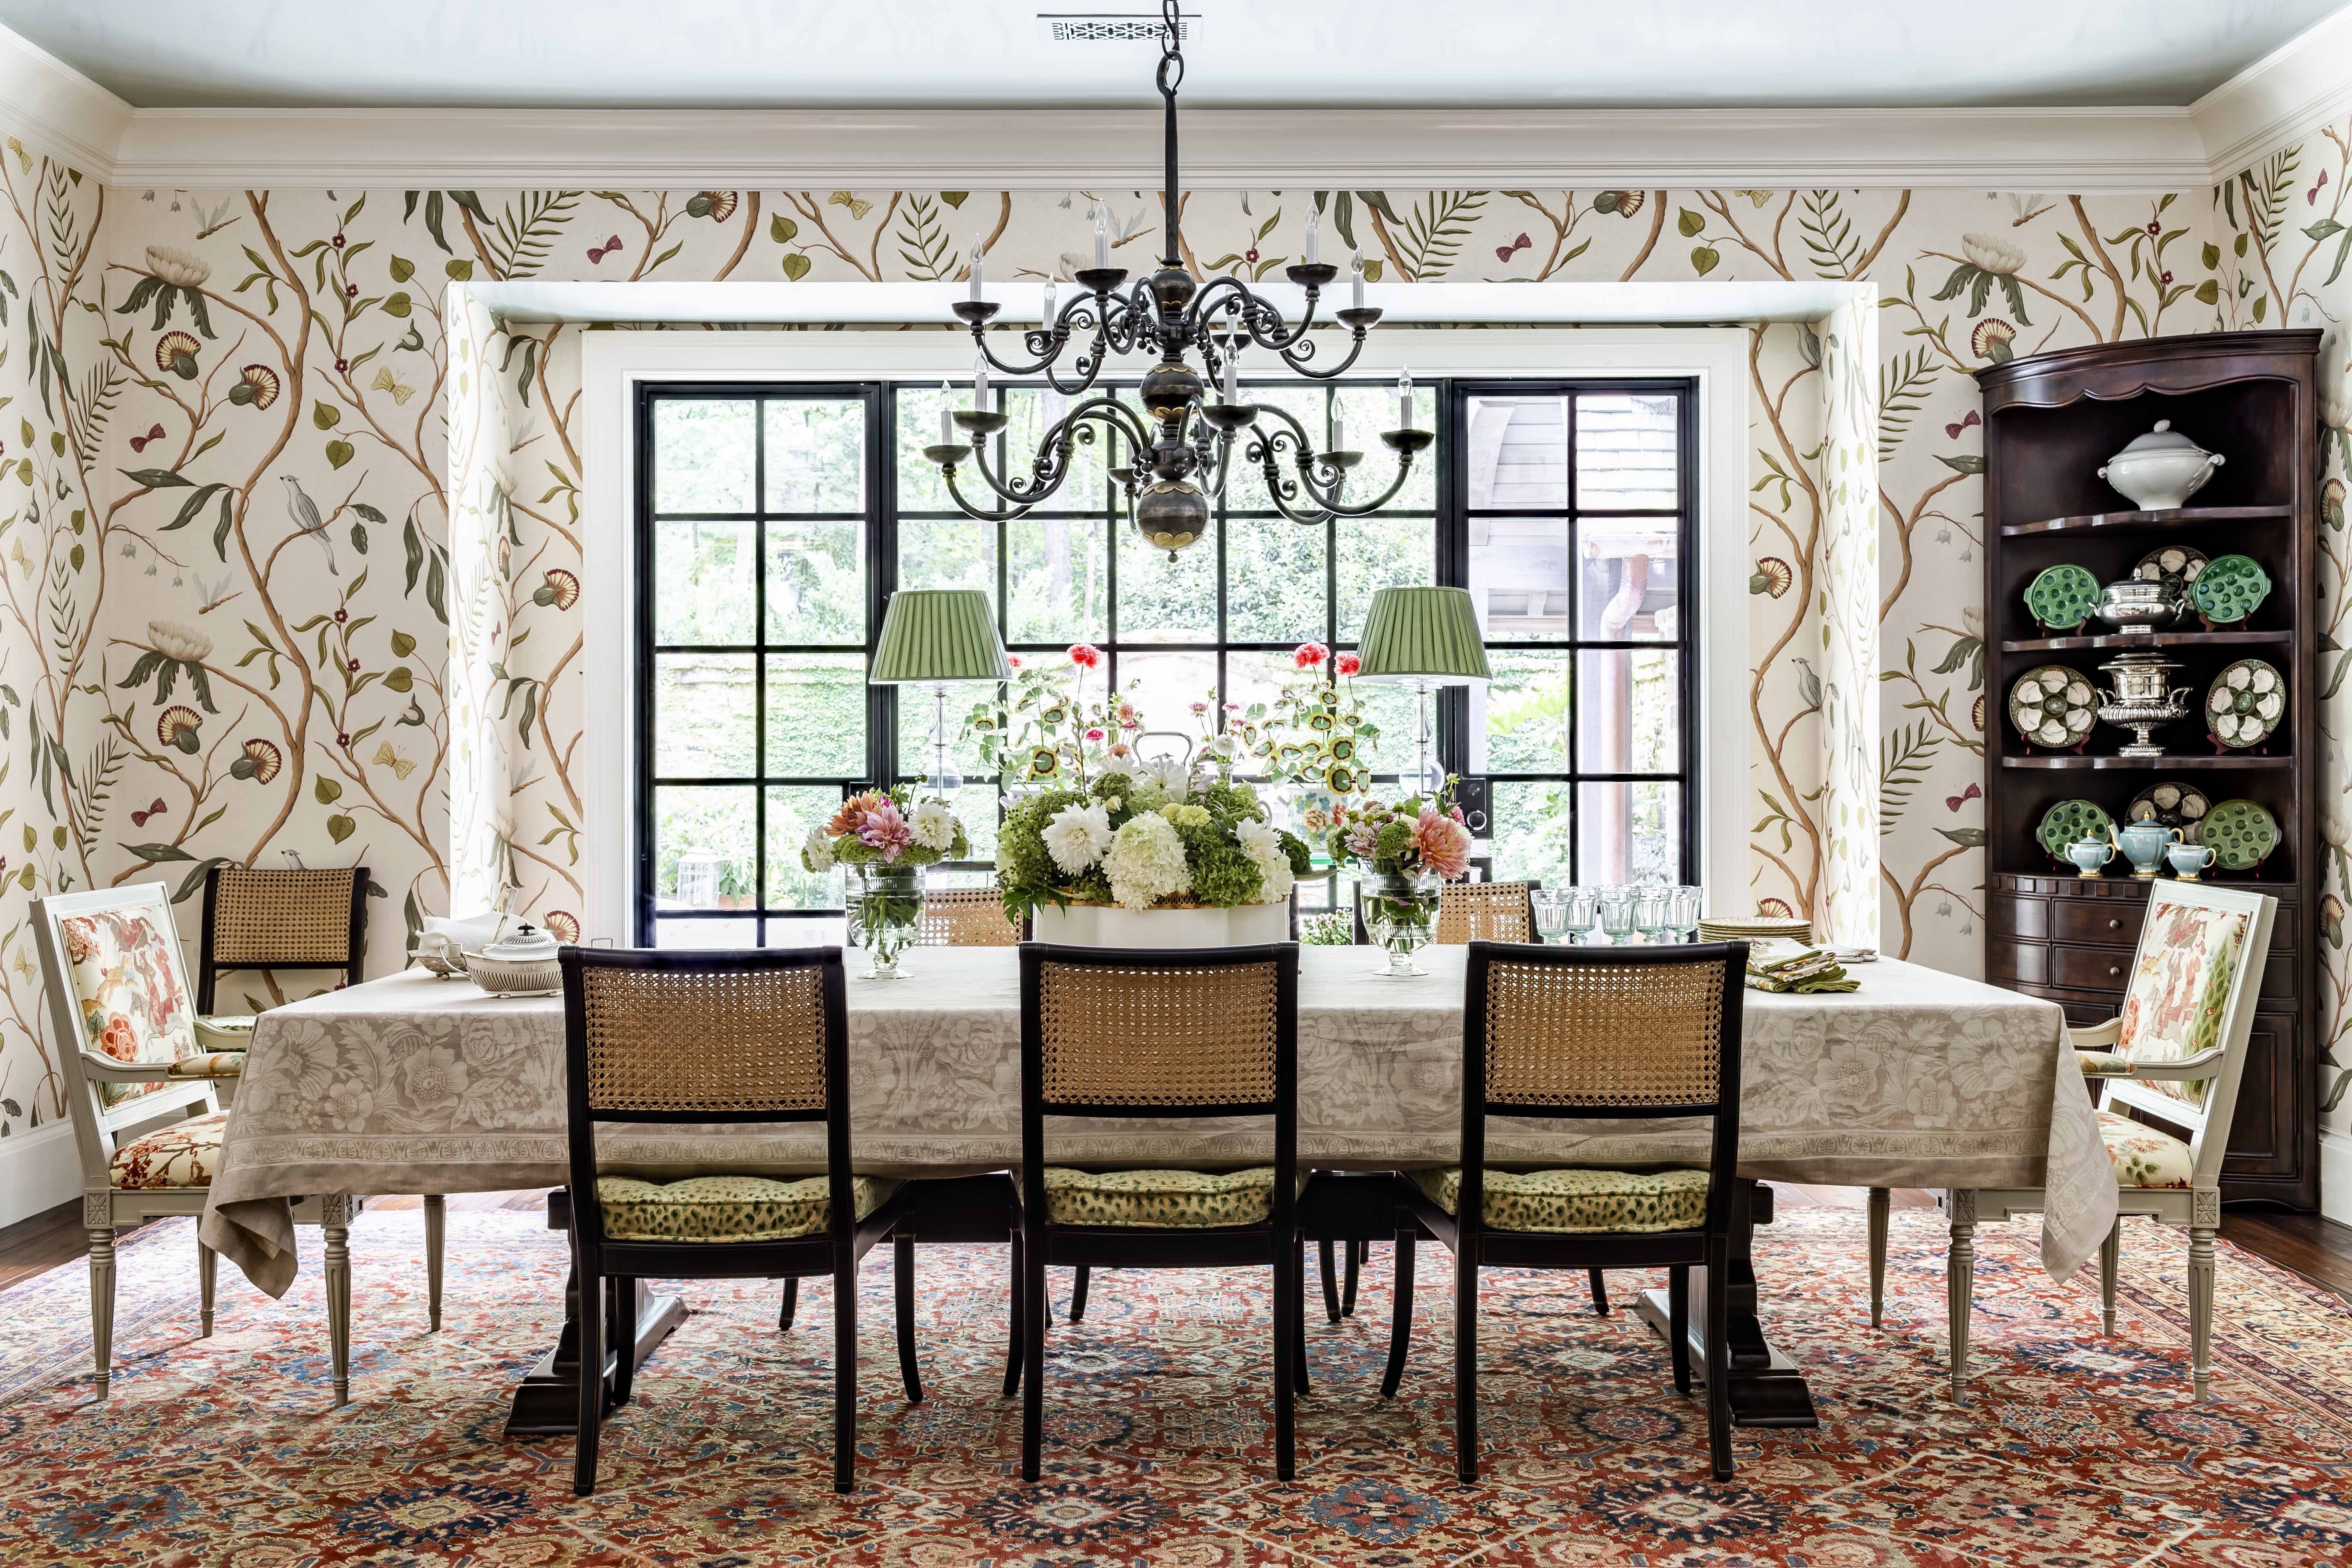 James Farmer New Book: Arriving Home - How to Mix Patterns in a Room